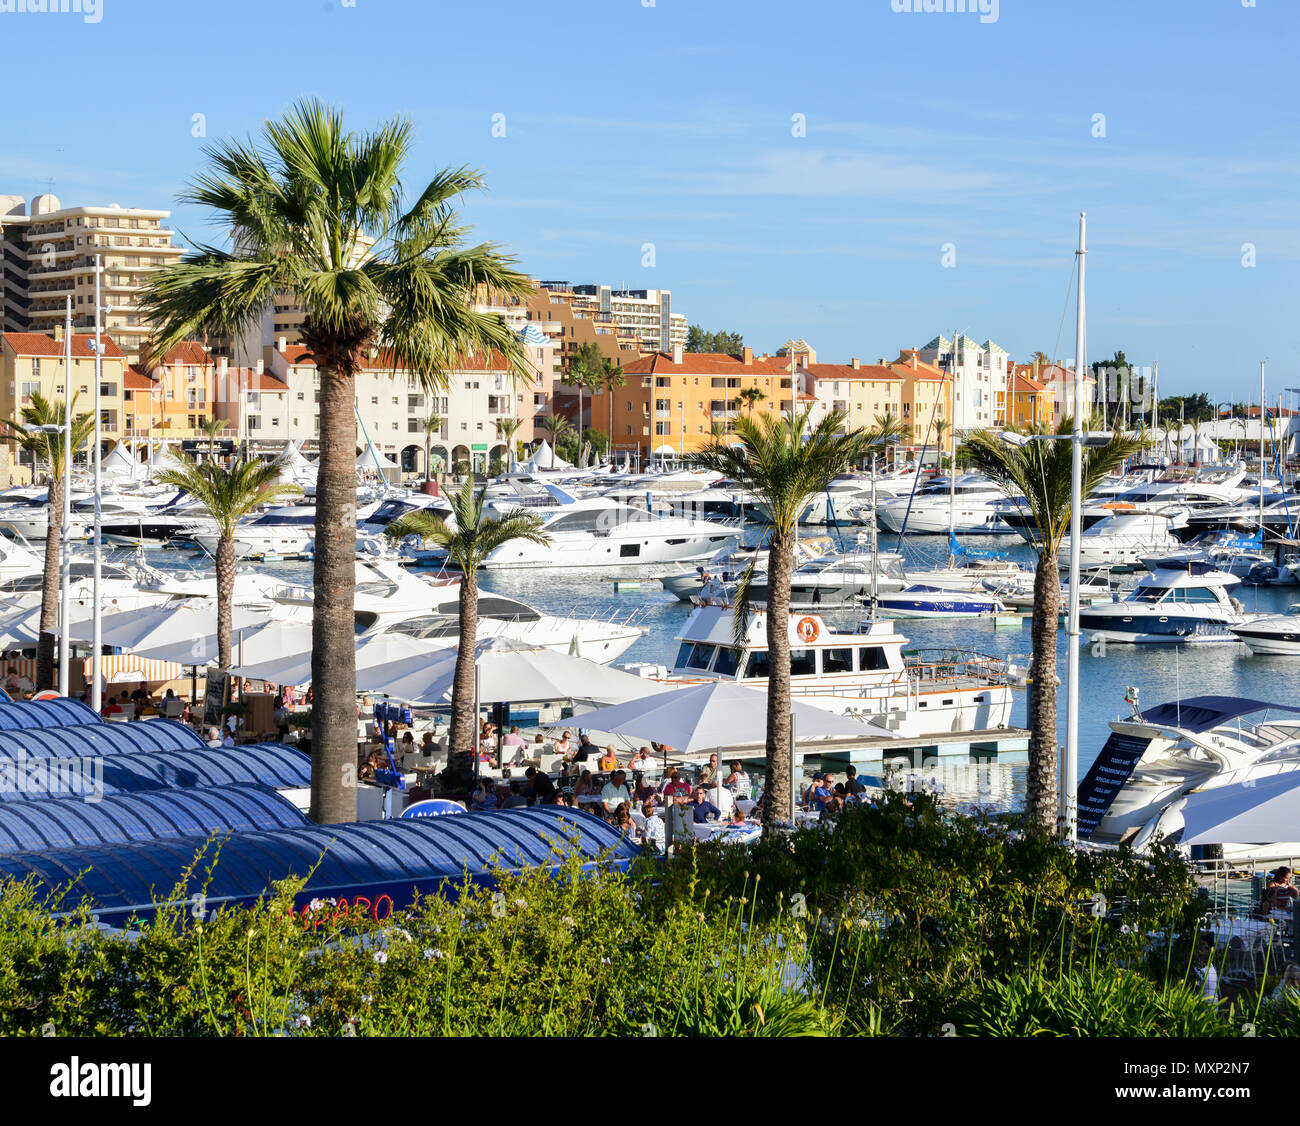 Promenade full of families next to marina at the fashionable resort town of VilaMoura in the southern Portuguese region of Algarve. Luxury Tivoli Hotel visible Stock Photo